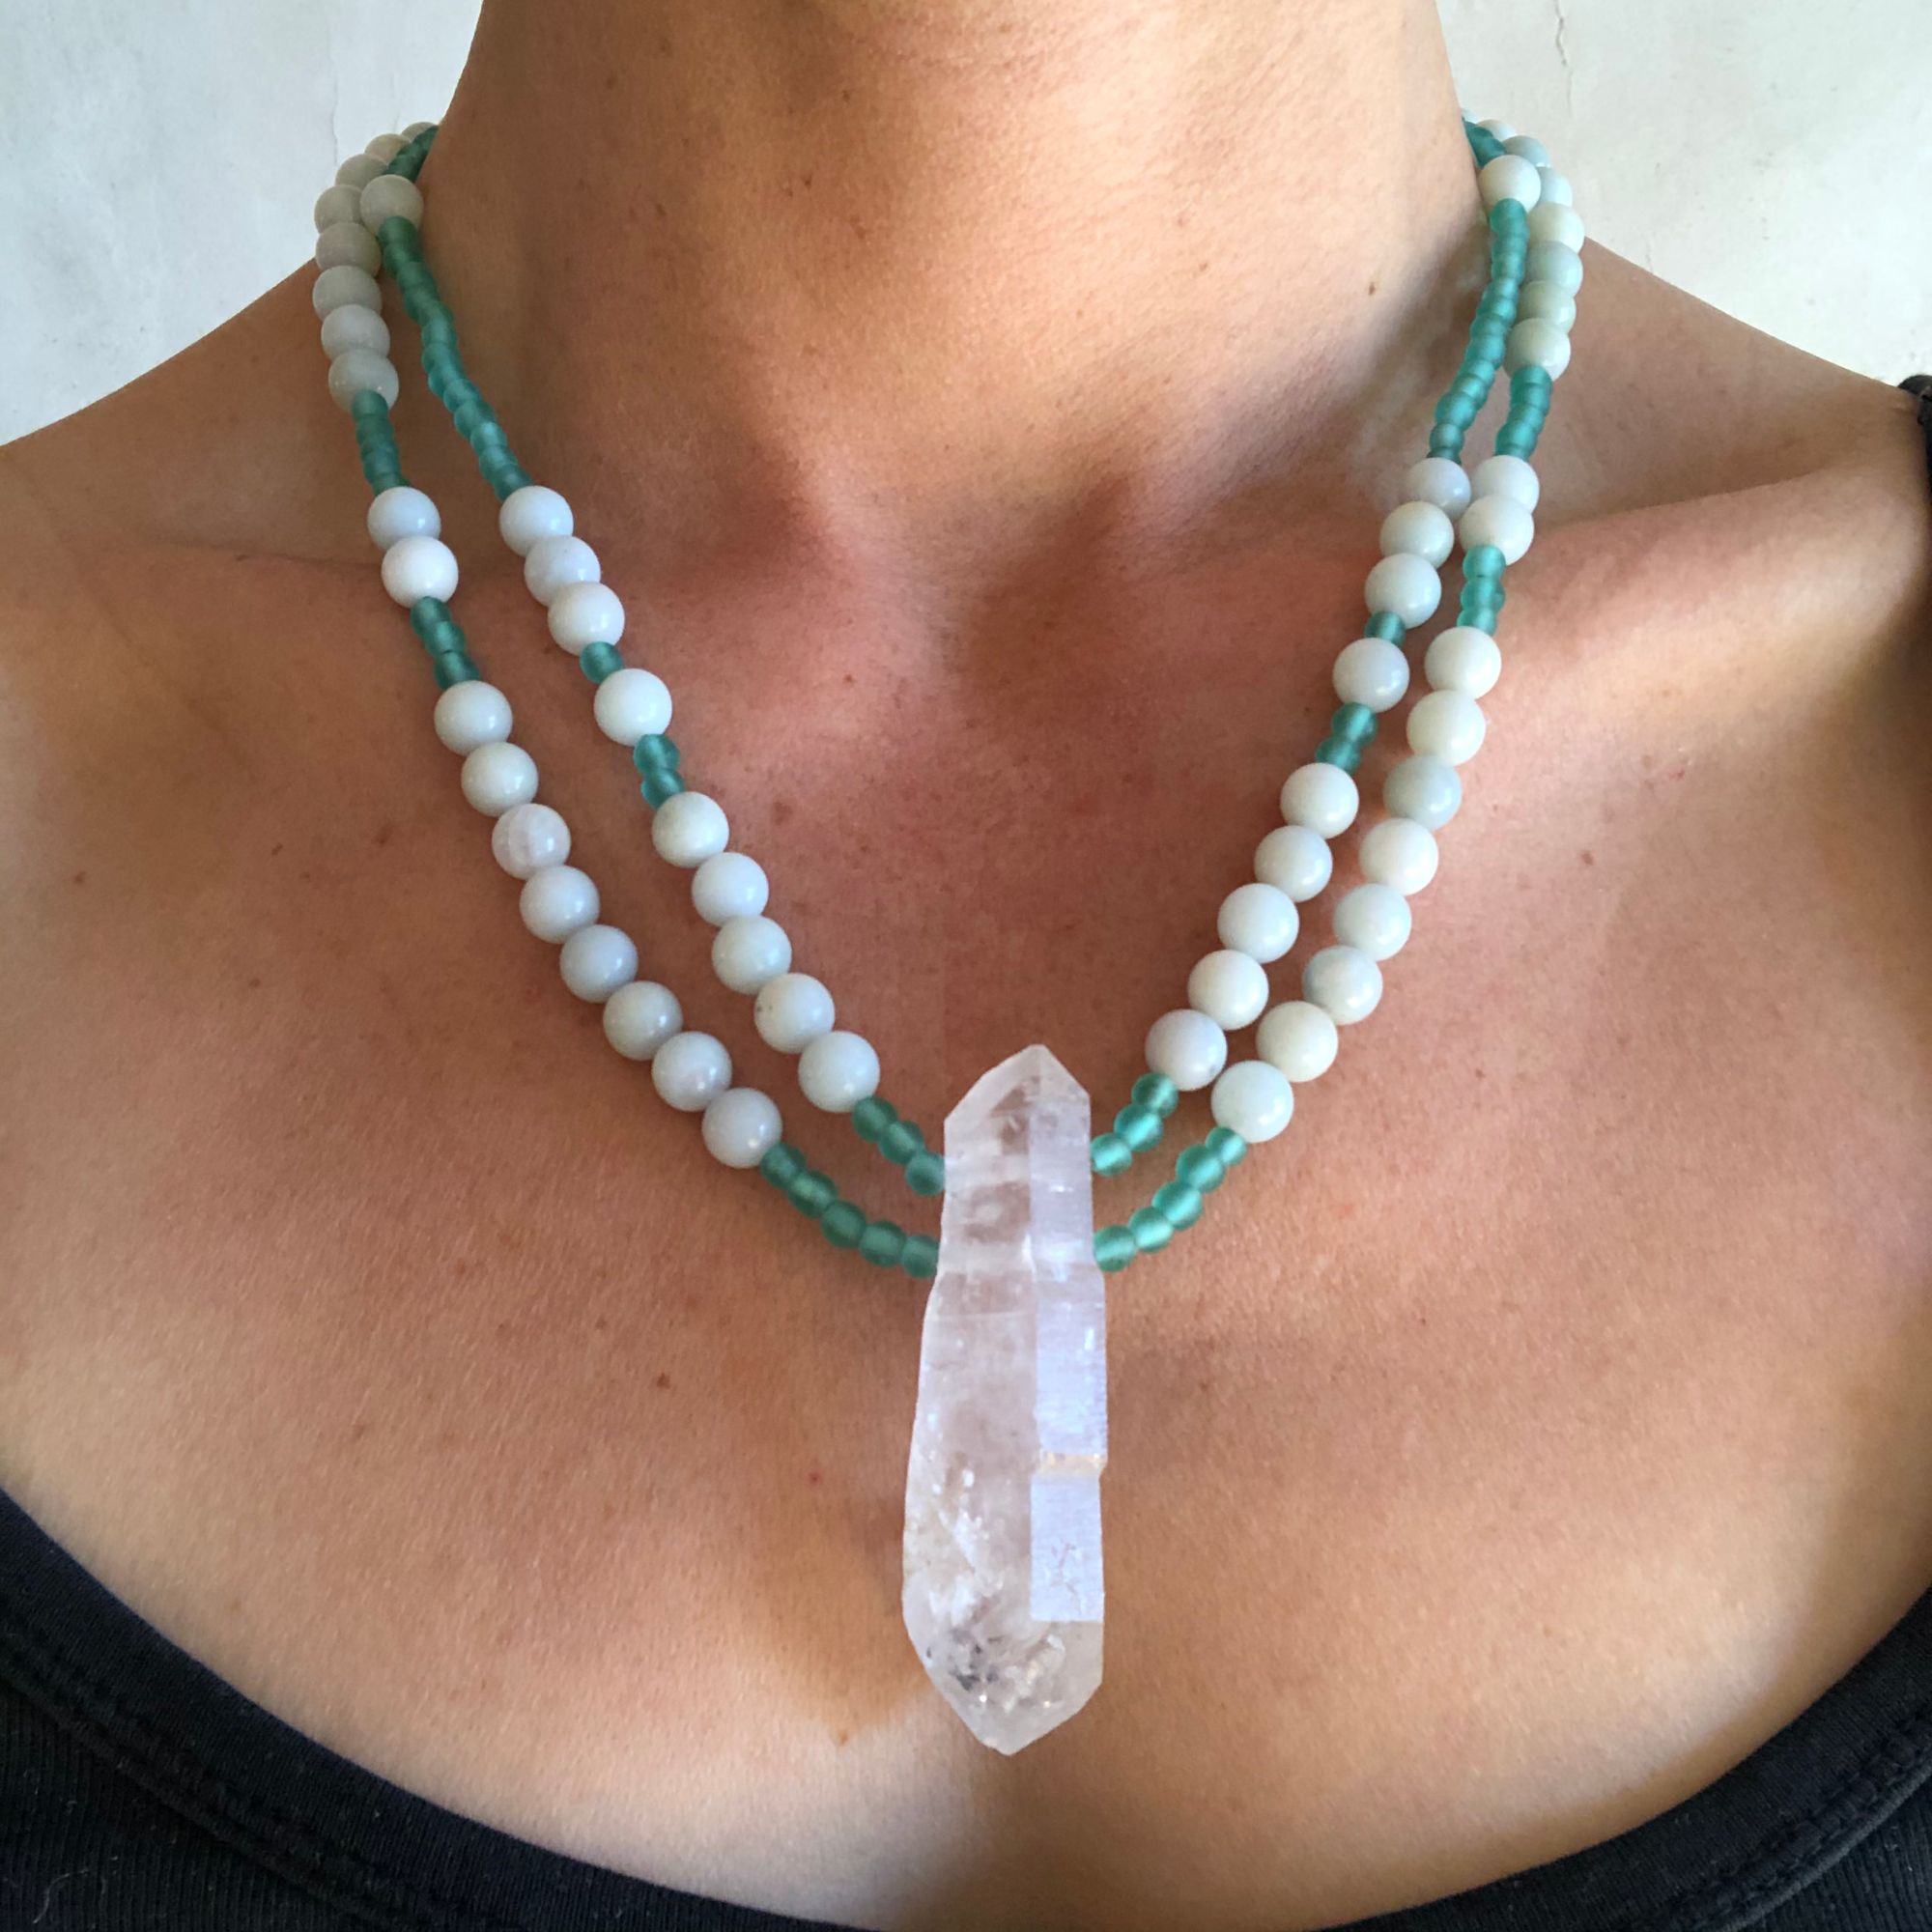 Woman wearing green necklace made of quartz, amazonite and glass beads